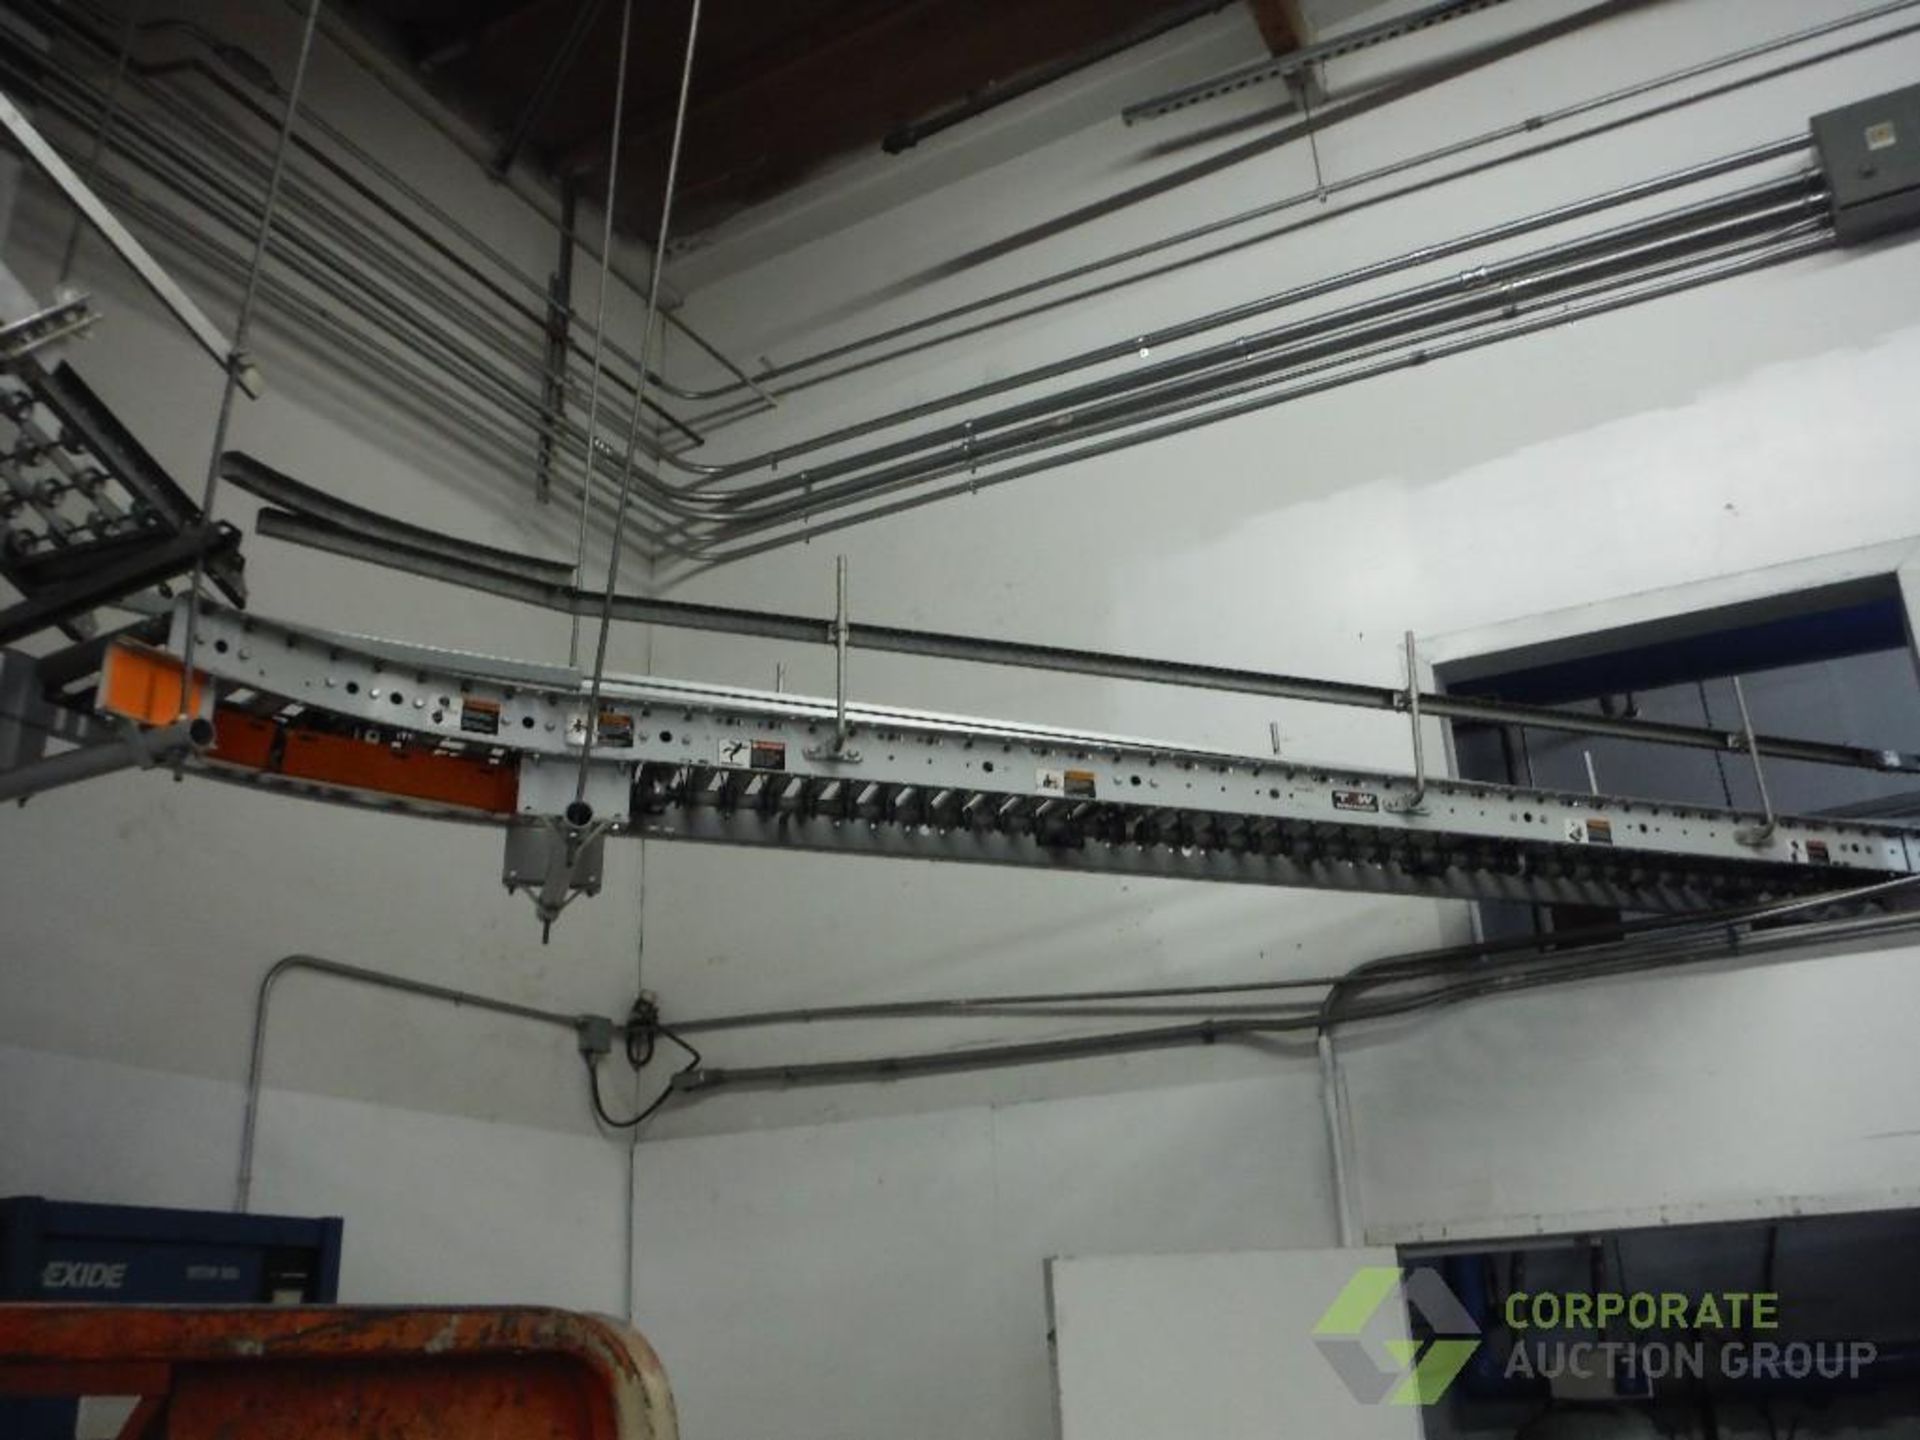 Overhead powered roller conveyor, approx. 60 ft. long x 16 in. wide, with approx. 30 ft. of skate